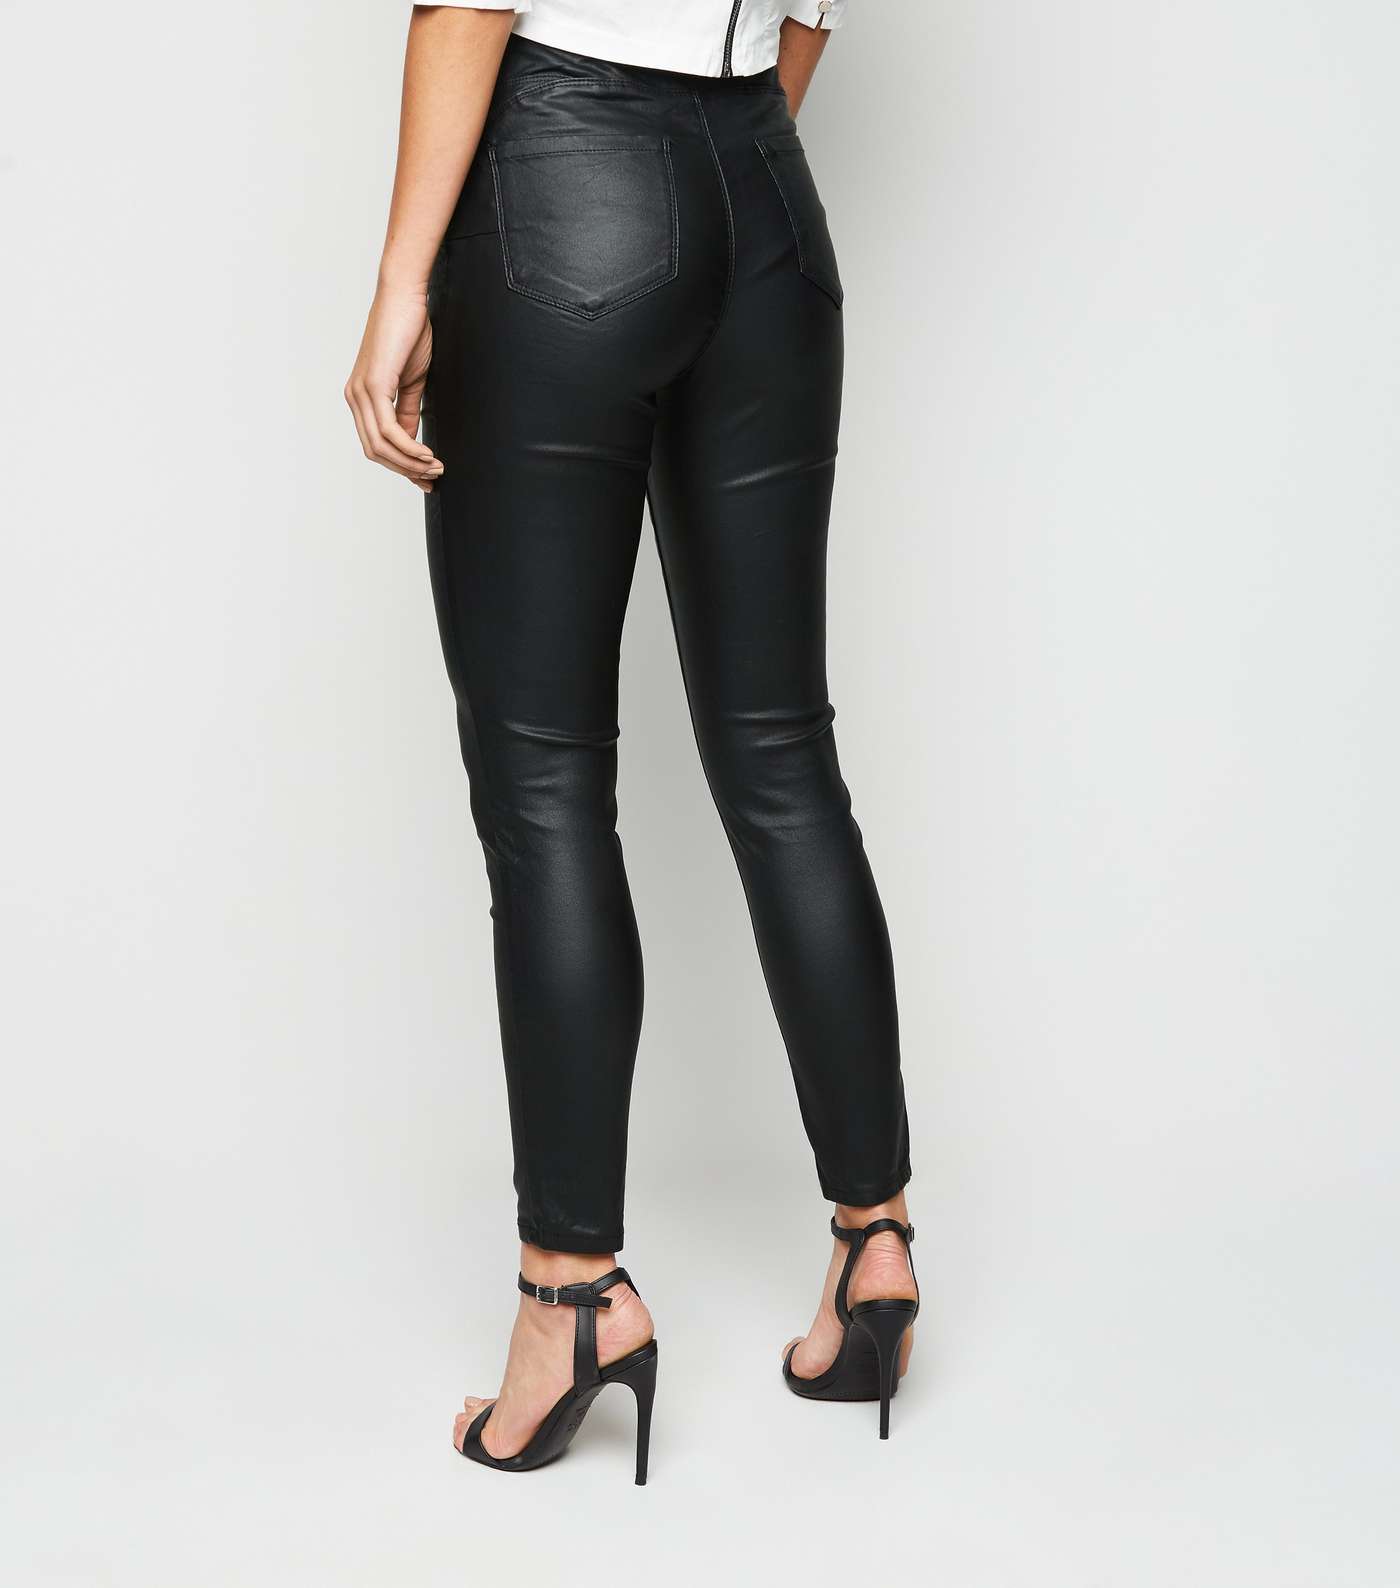 Urban Bliss Black Leather-Look Skinny Jeans  Image 3